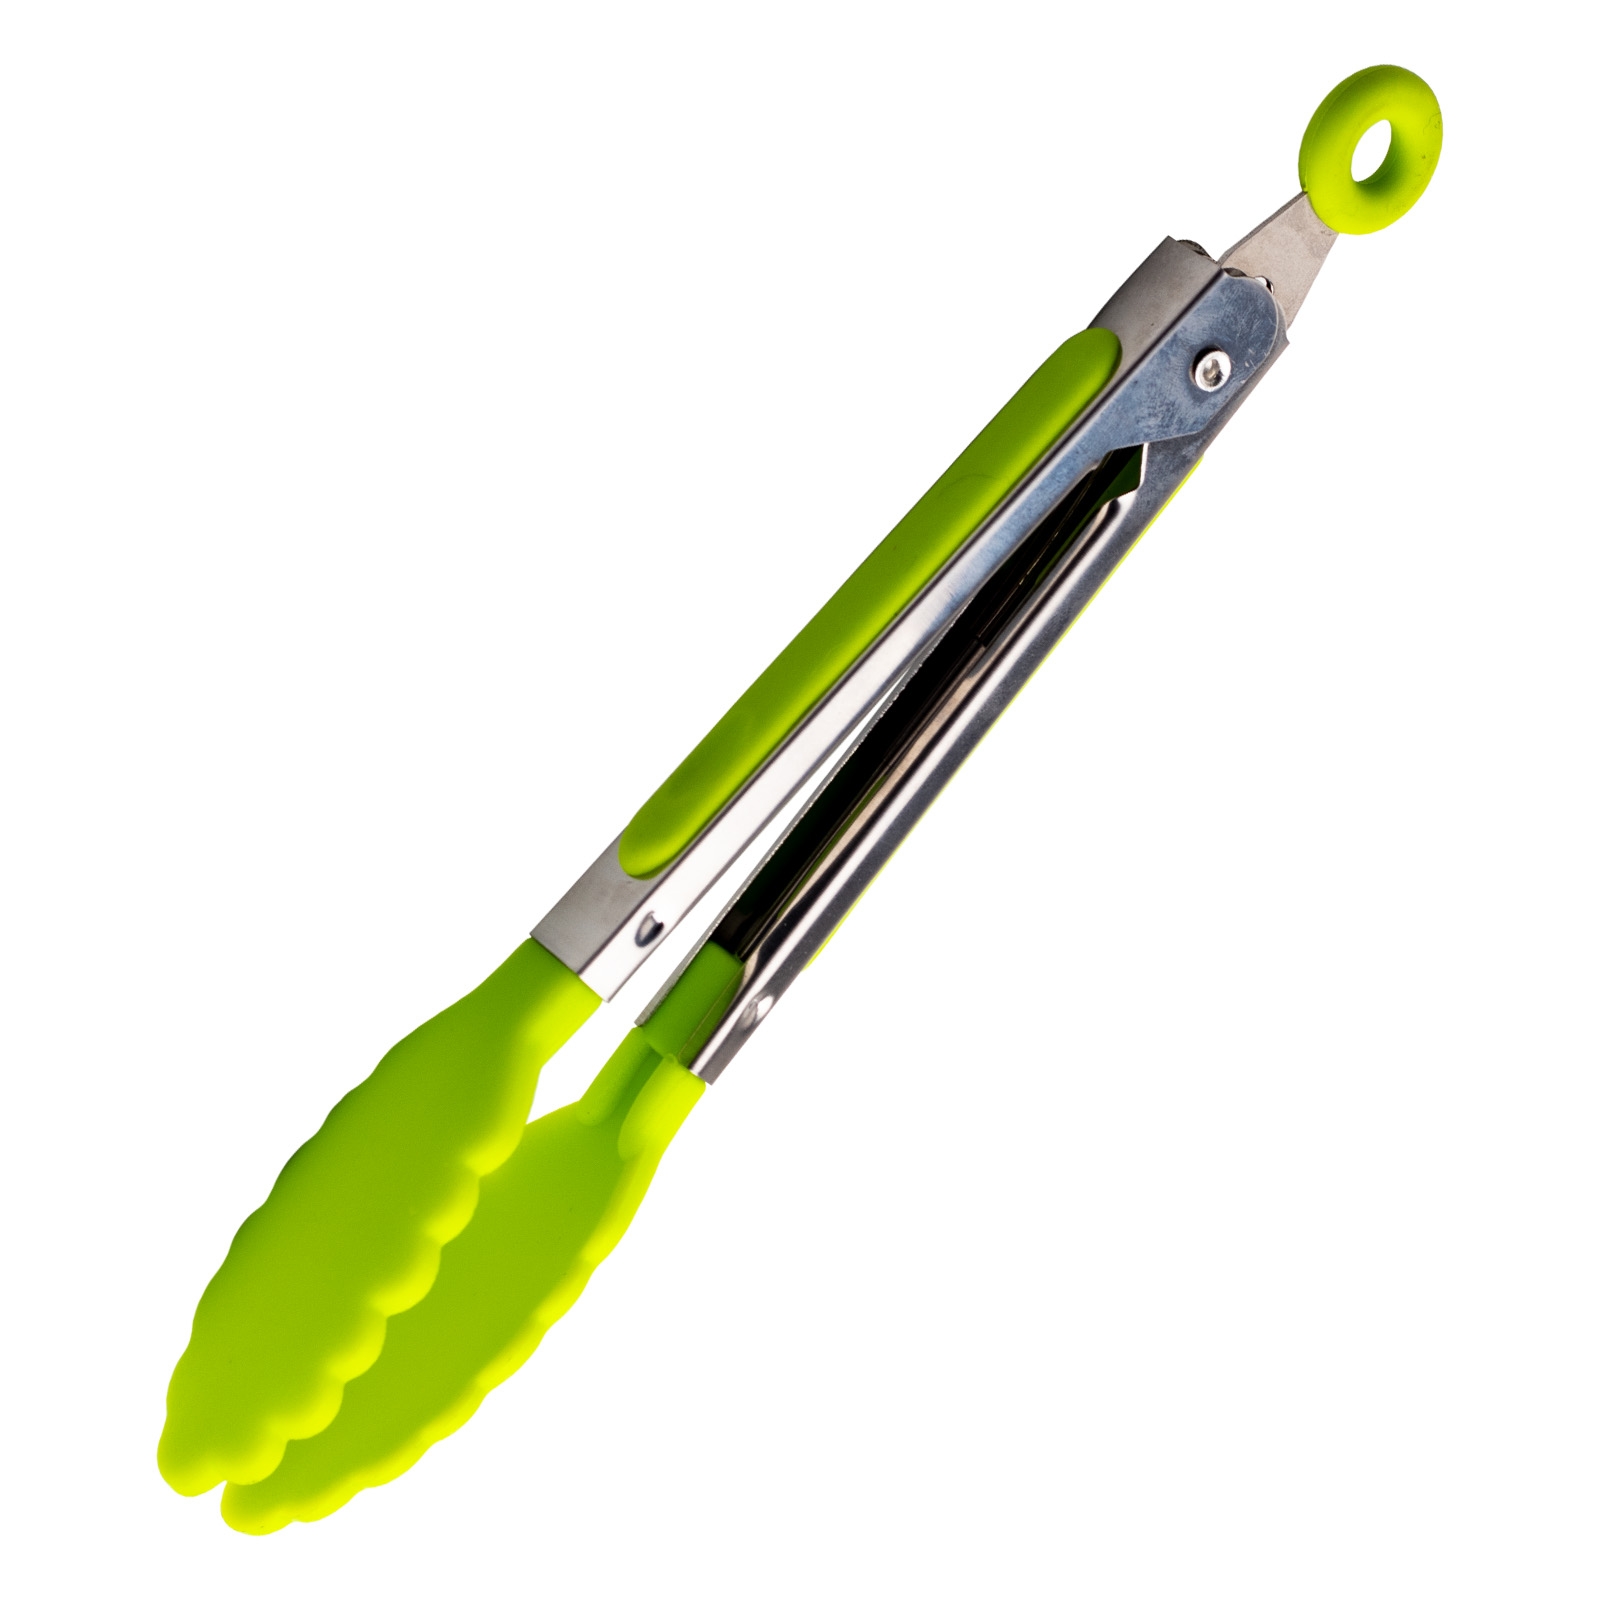 Kitchen Tongs for Cooking, 9 Inch Small Silicone Tongs, Food Grade Mini  Serving Tongs with Silicone Tips, Set of 3, Green